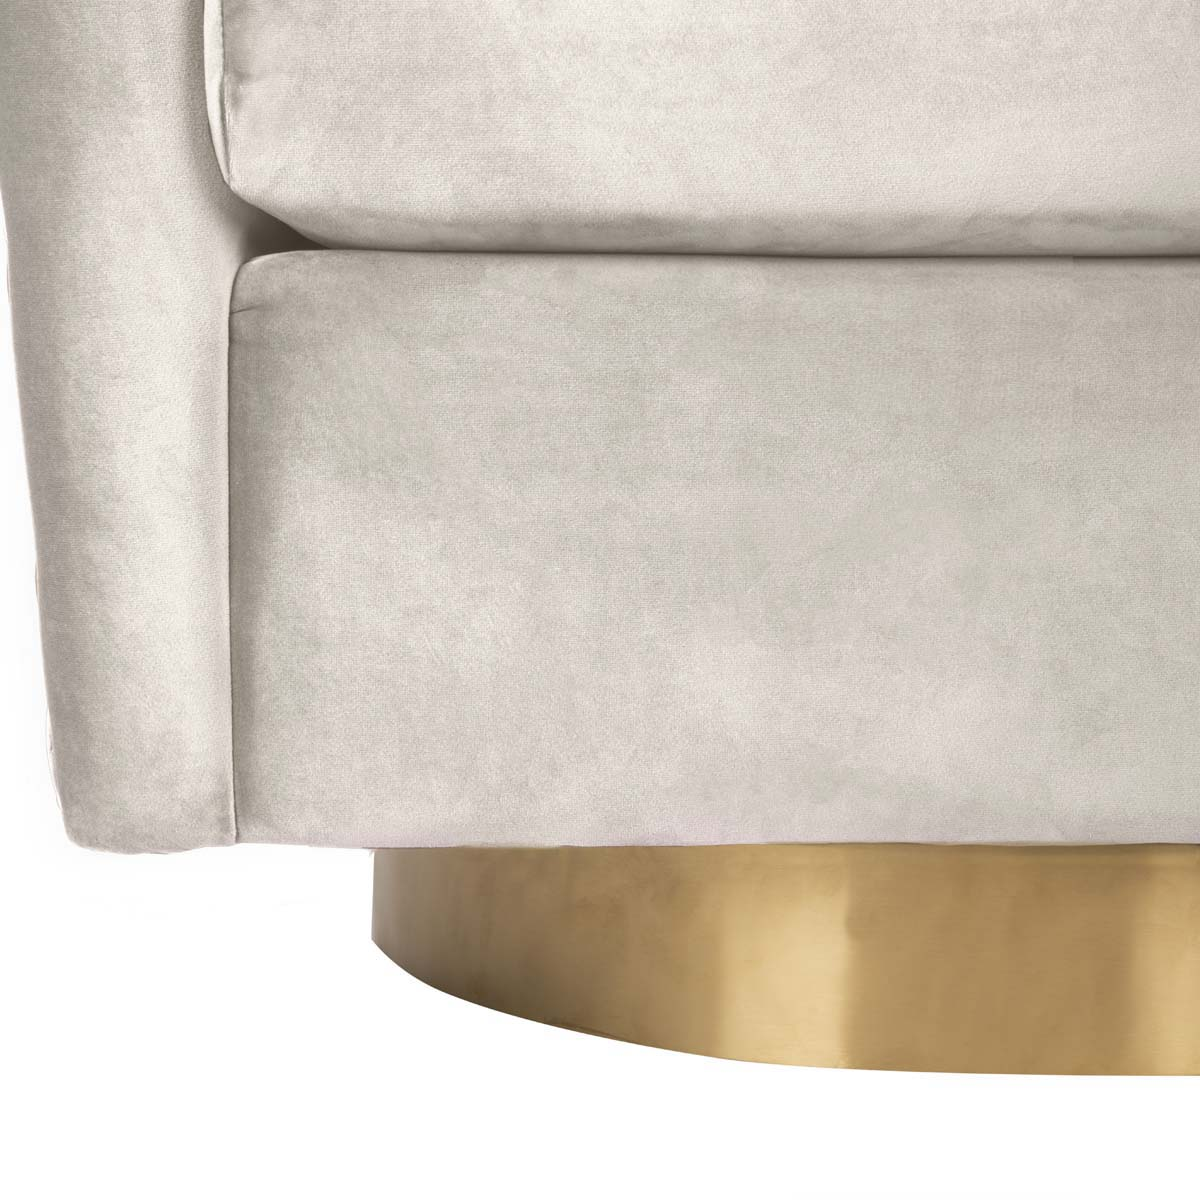 Safavieh Couture Clara Quilted Swivel Tub Chair - Pale Taupe